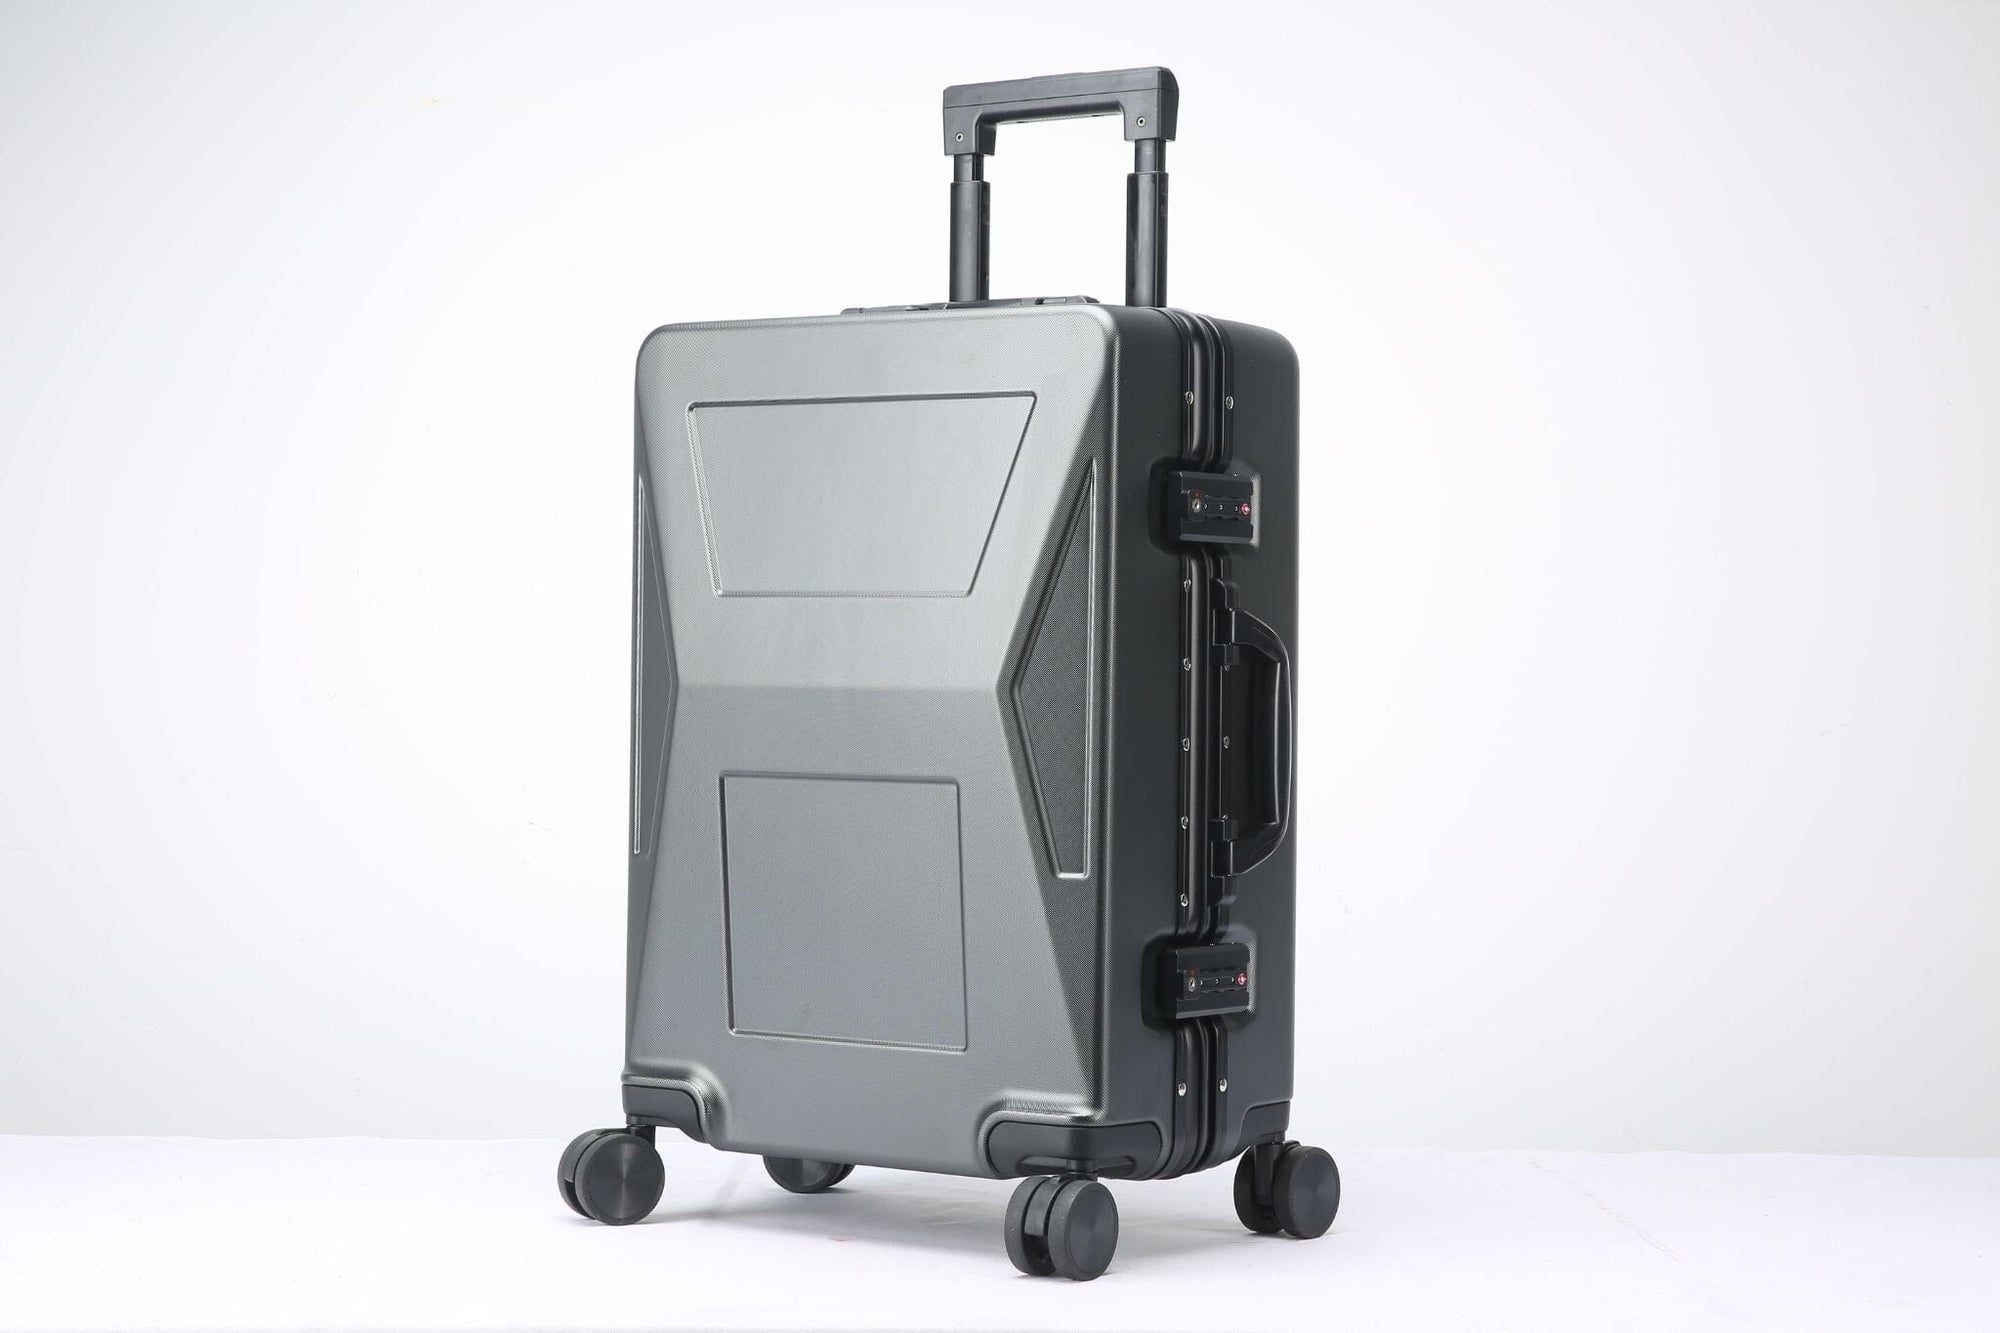 Can a 24 inch luggage be a carry-on?